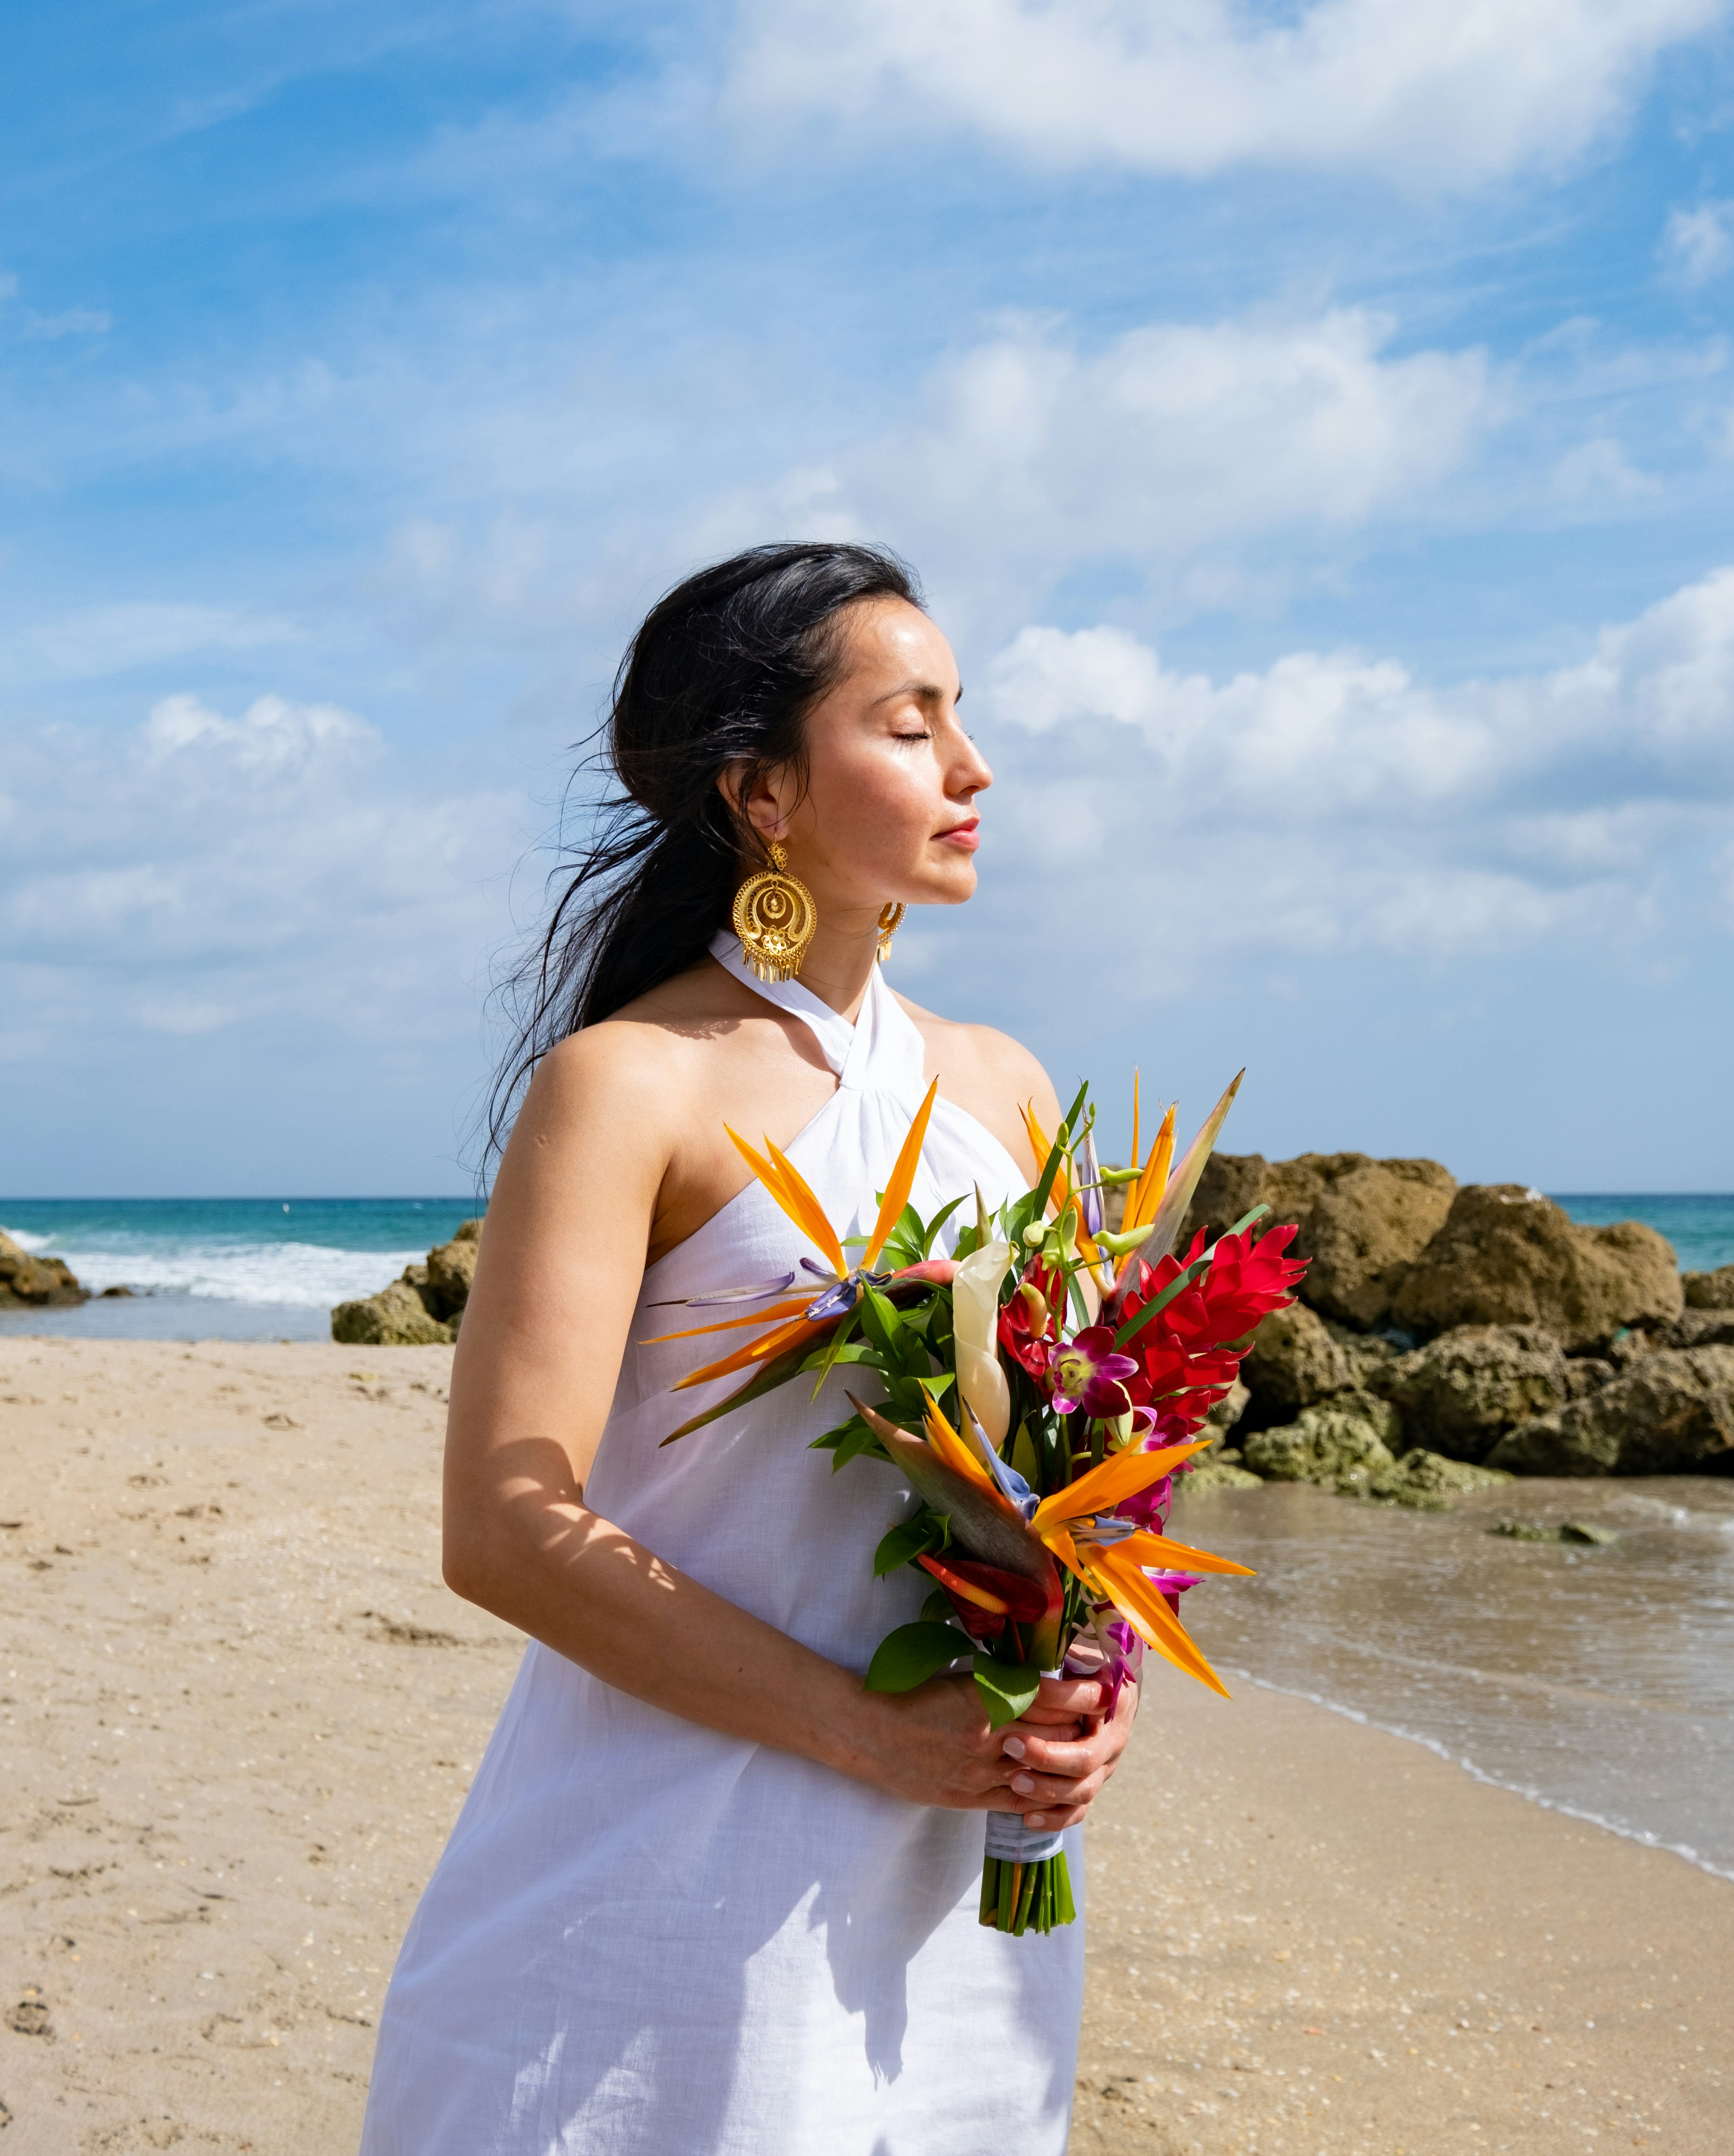 woman in white spaghetti strap dress holding bouquet of flowers standing on beach during daytime